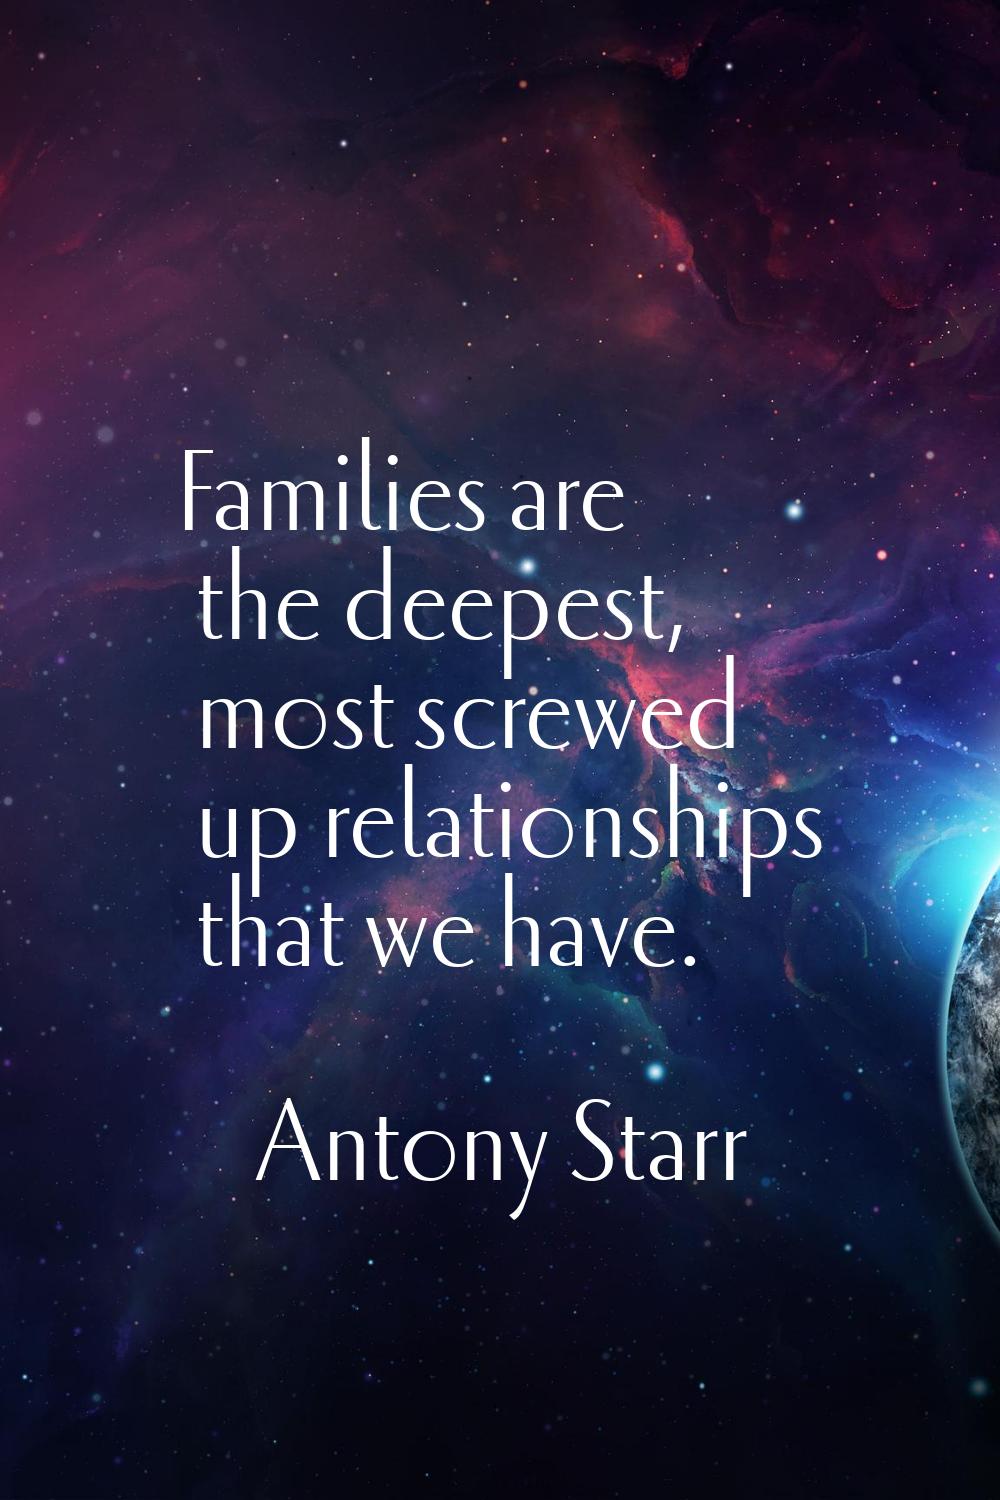 Families are the deepest, most screwed up relationships that we have.